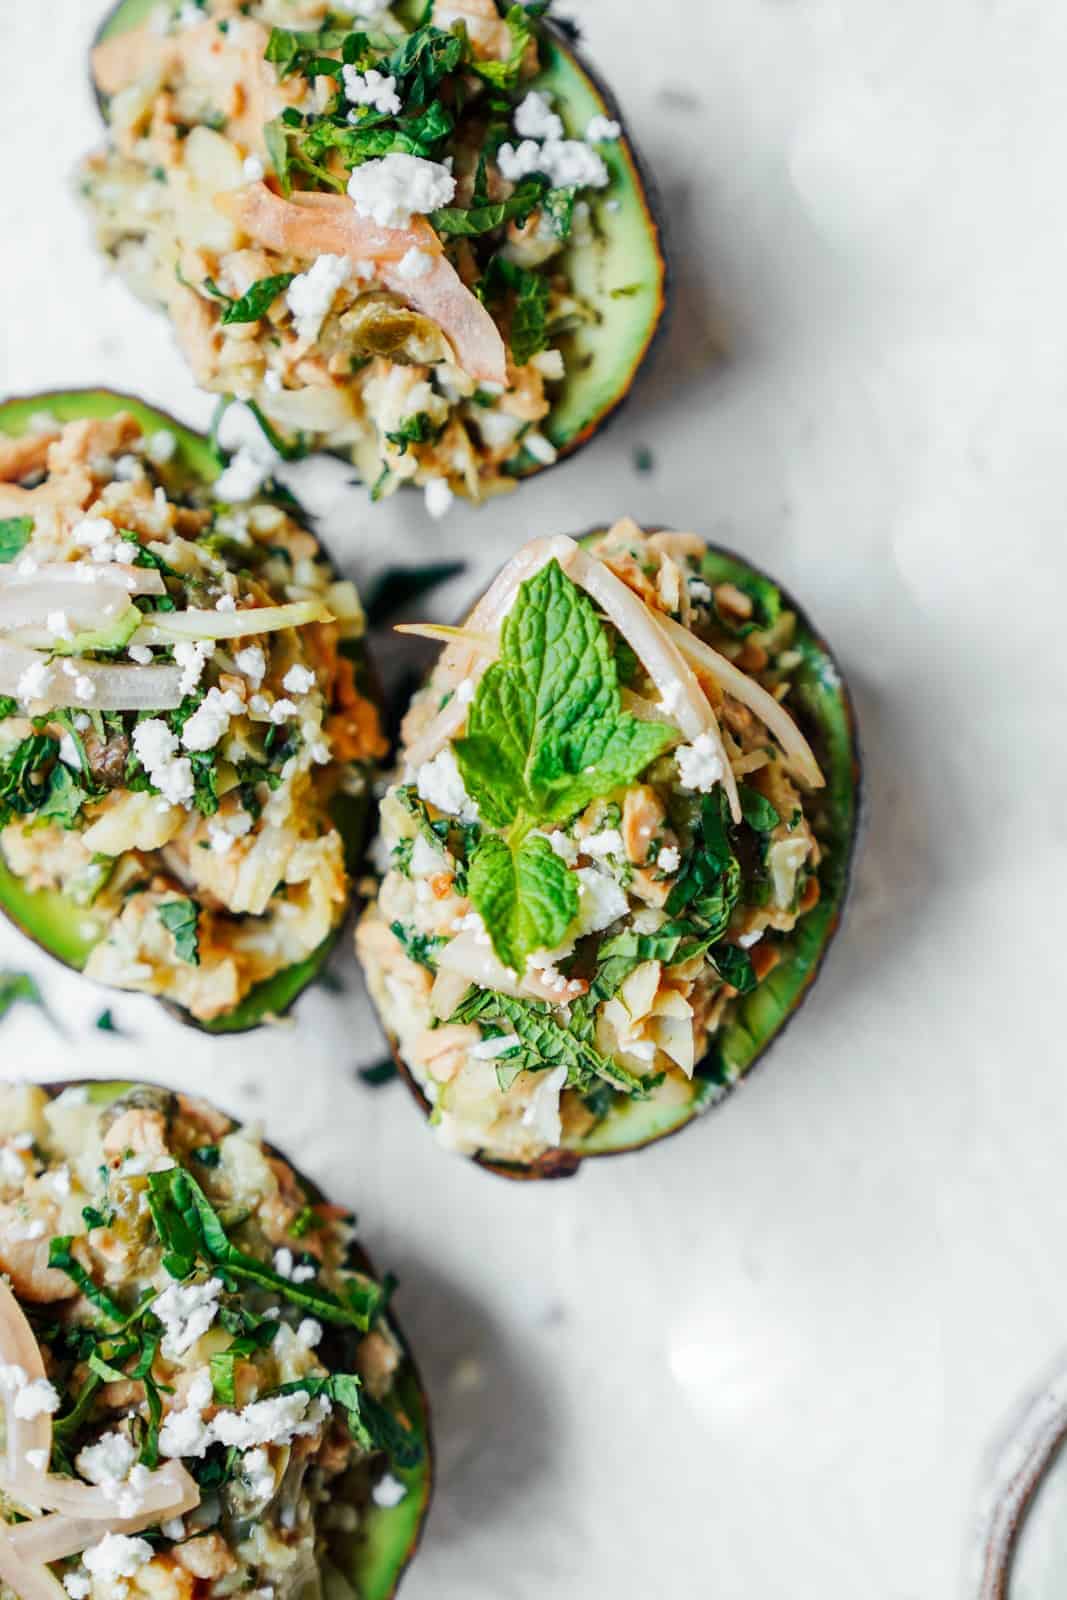 This quick and easy tuna salad recipe is vegan friendly and will not only save you time, but also save the ocean. Perfect for a hot summer day or meal prep!